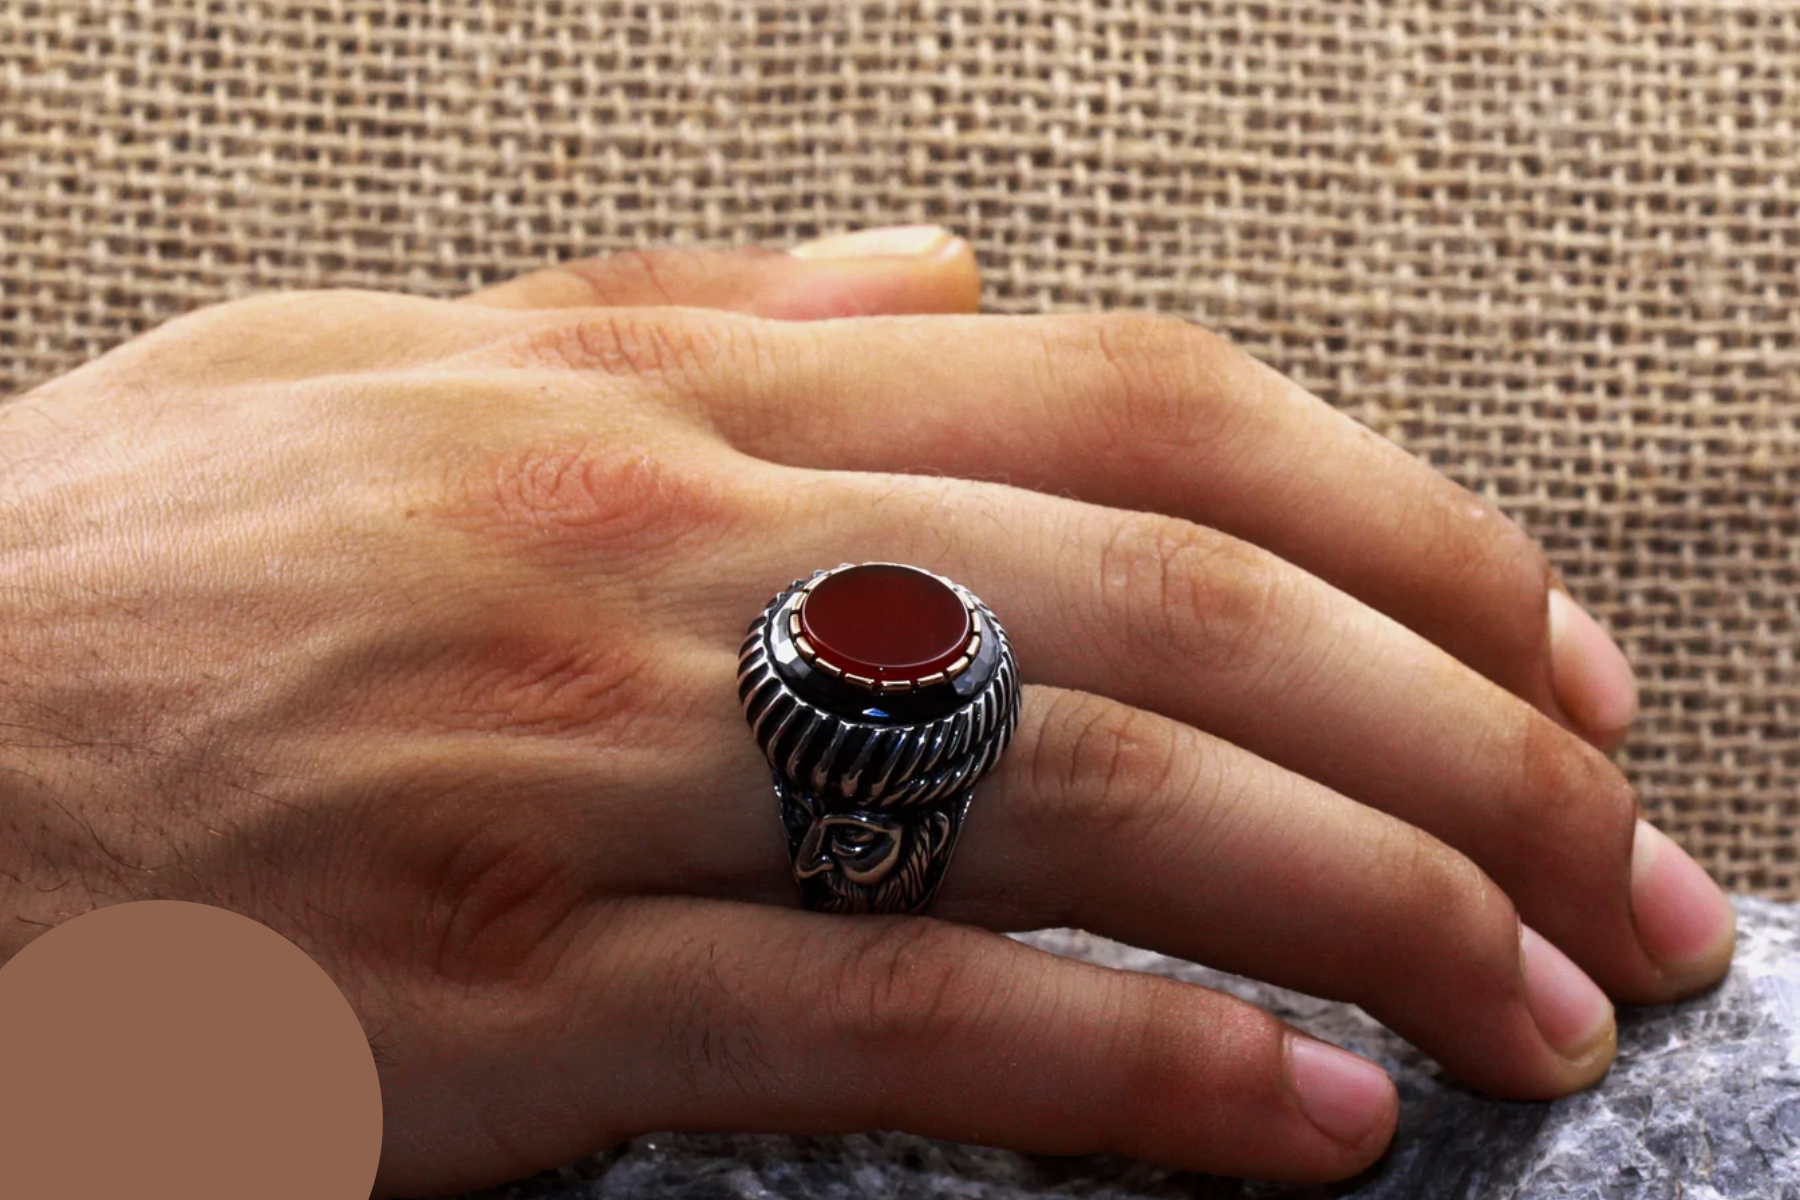 Agate stone ring on a man's ring finger